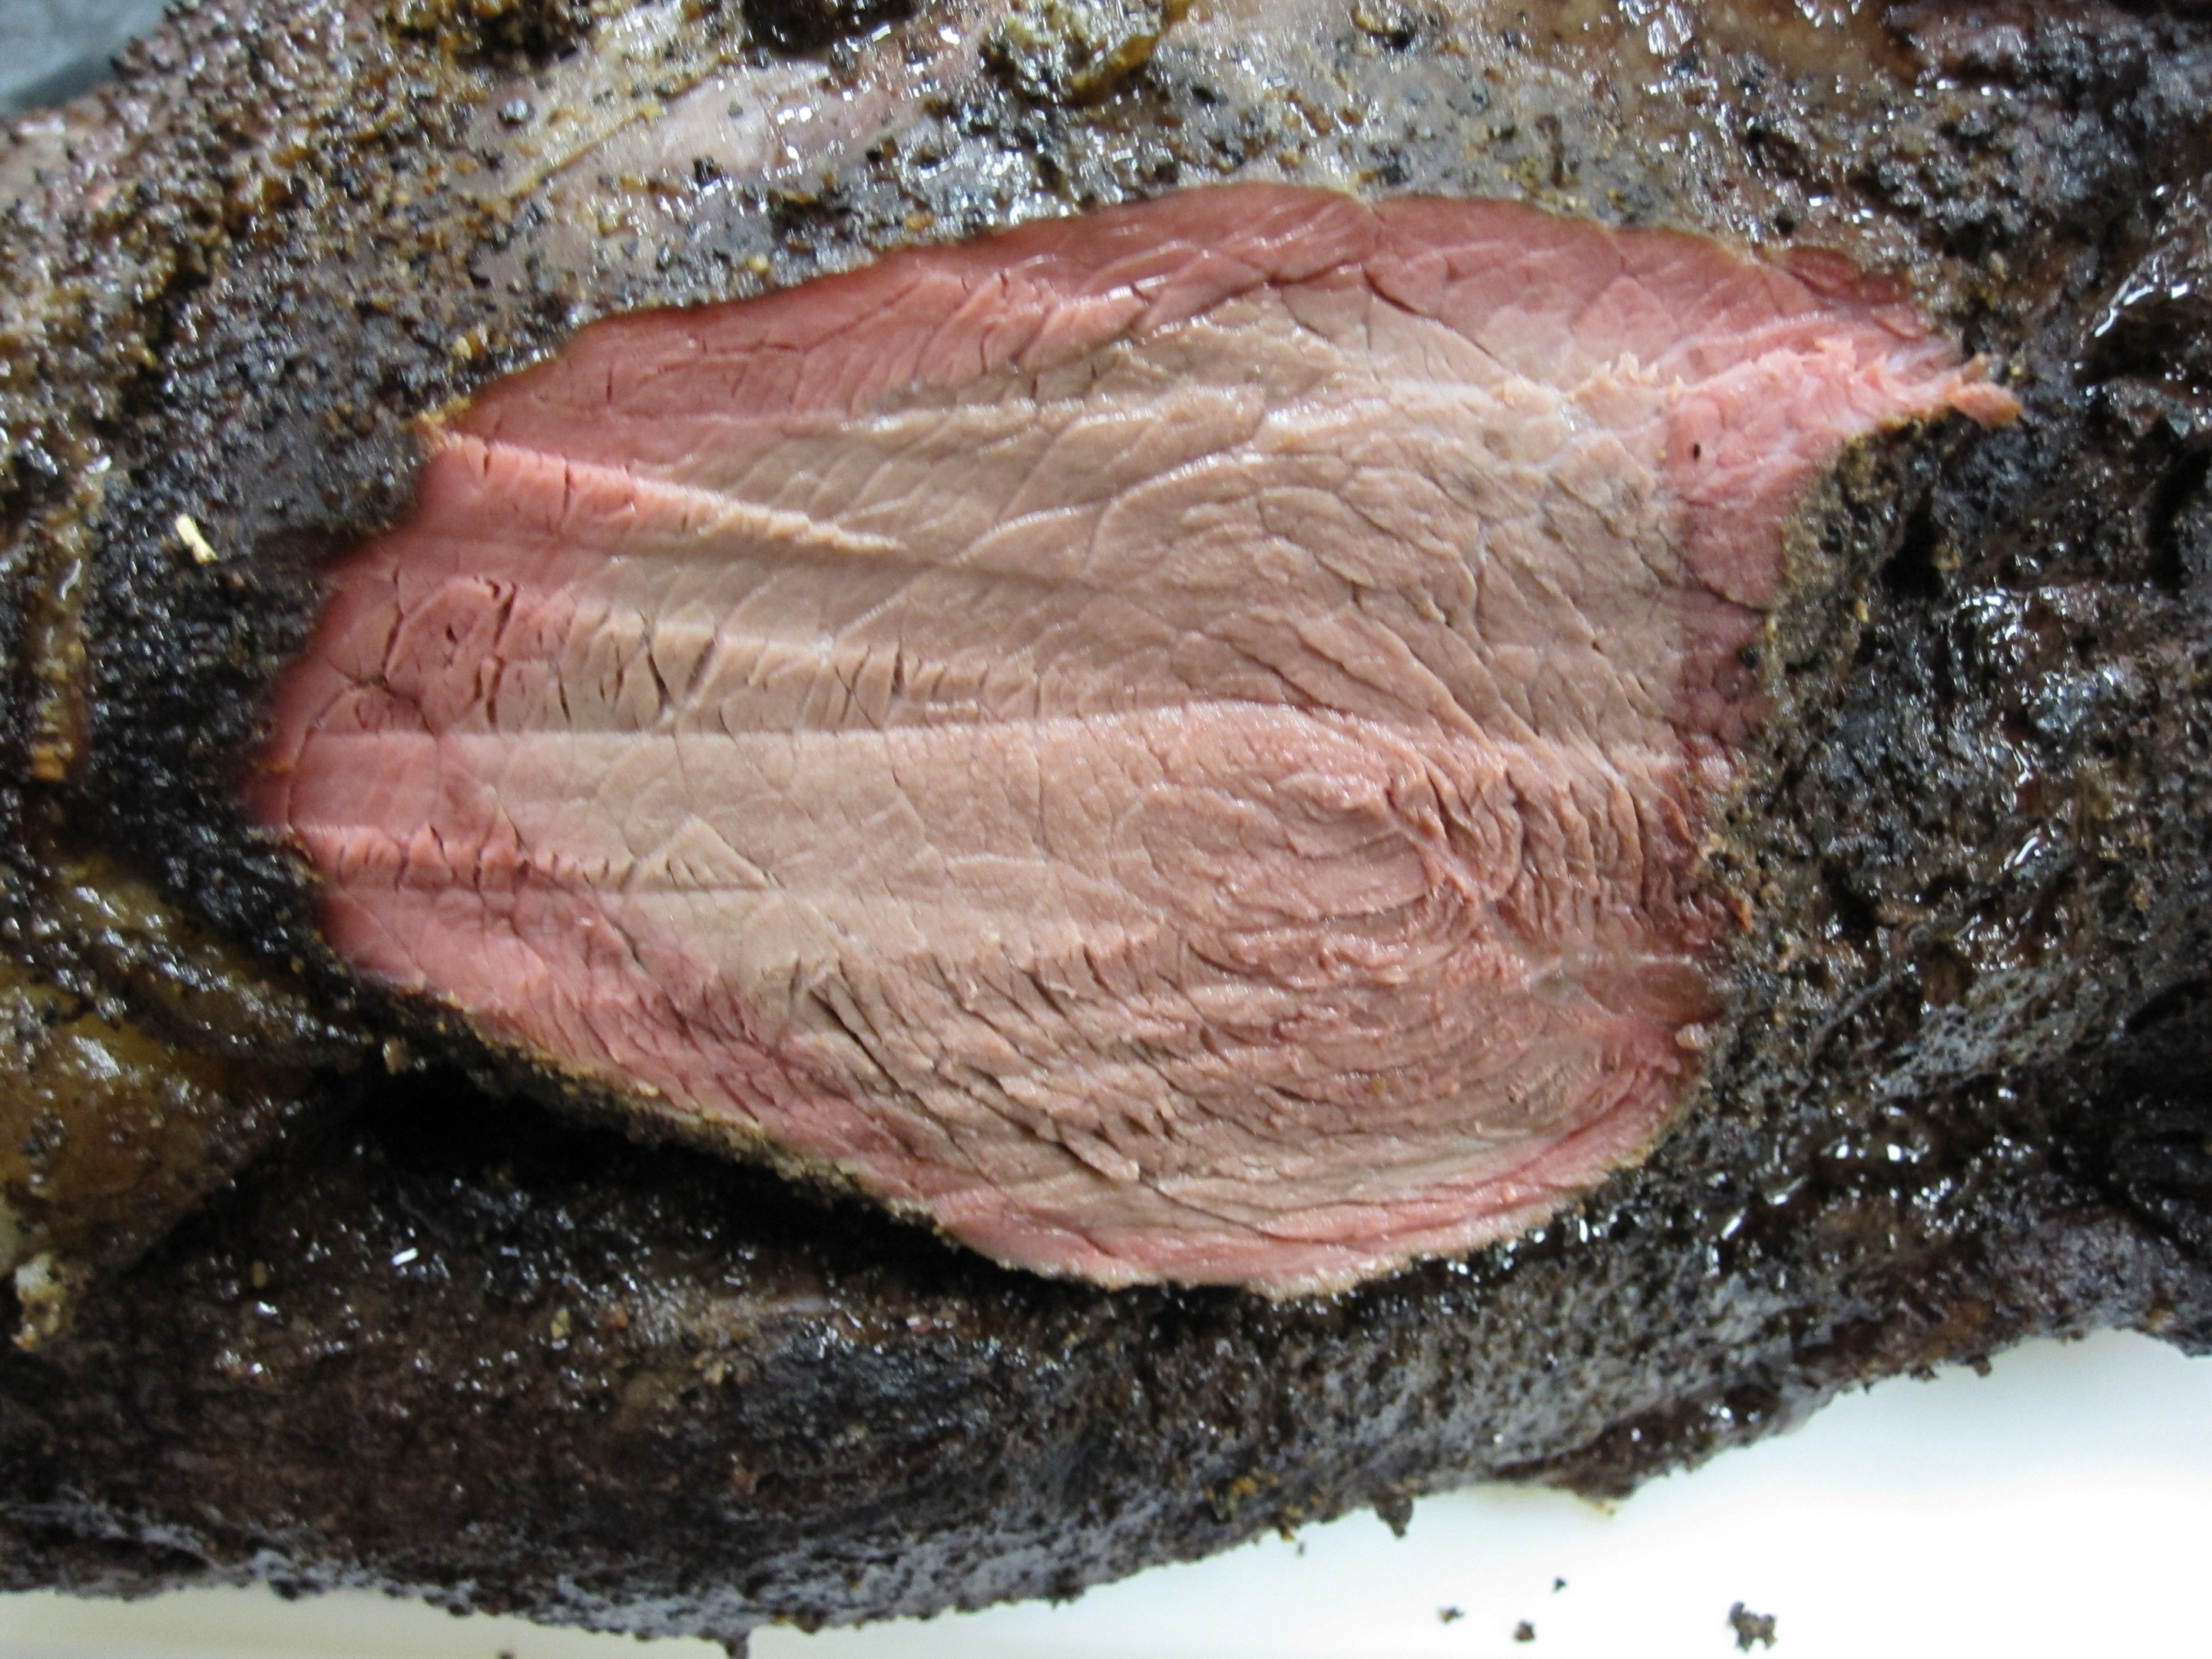 A close up of a cooked beef brisket.